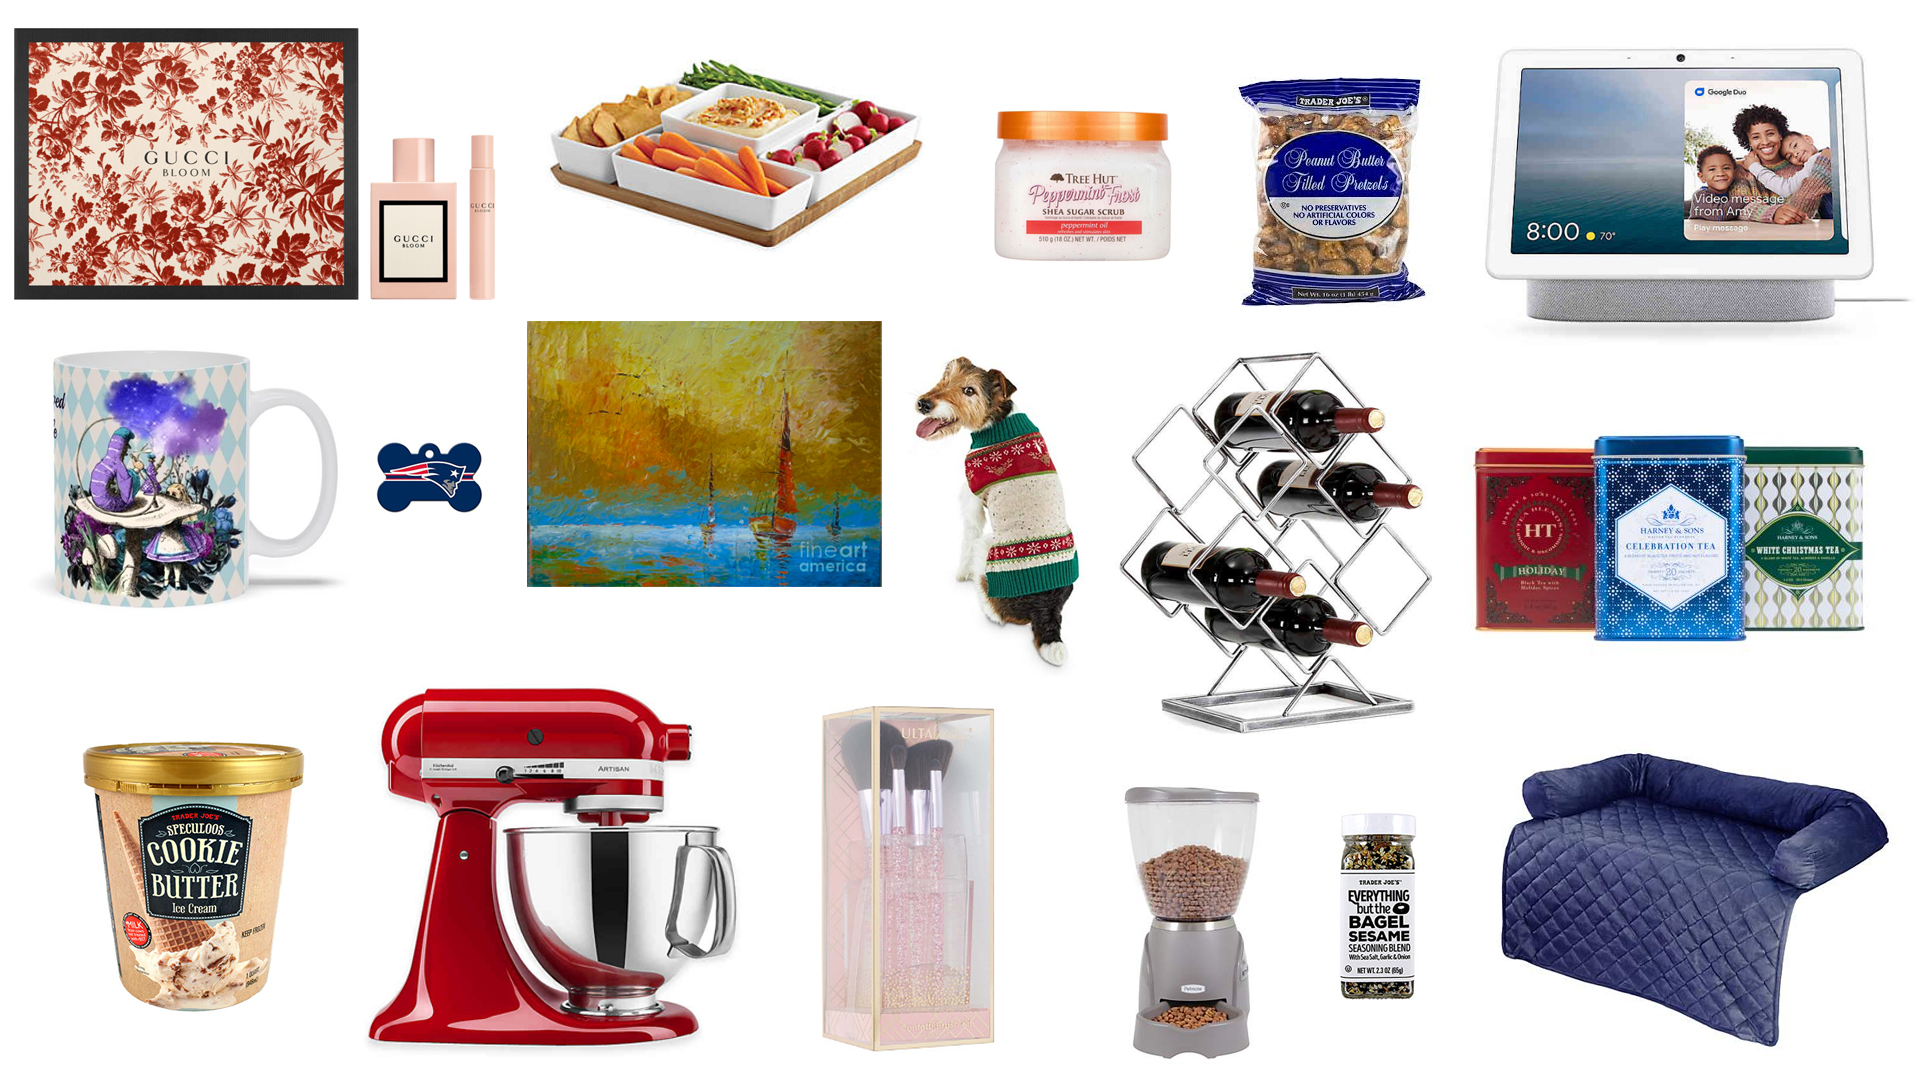 Patriot Place Holiday Gift Guide 2019 - For the Hostess